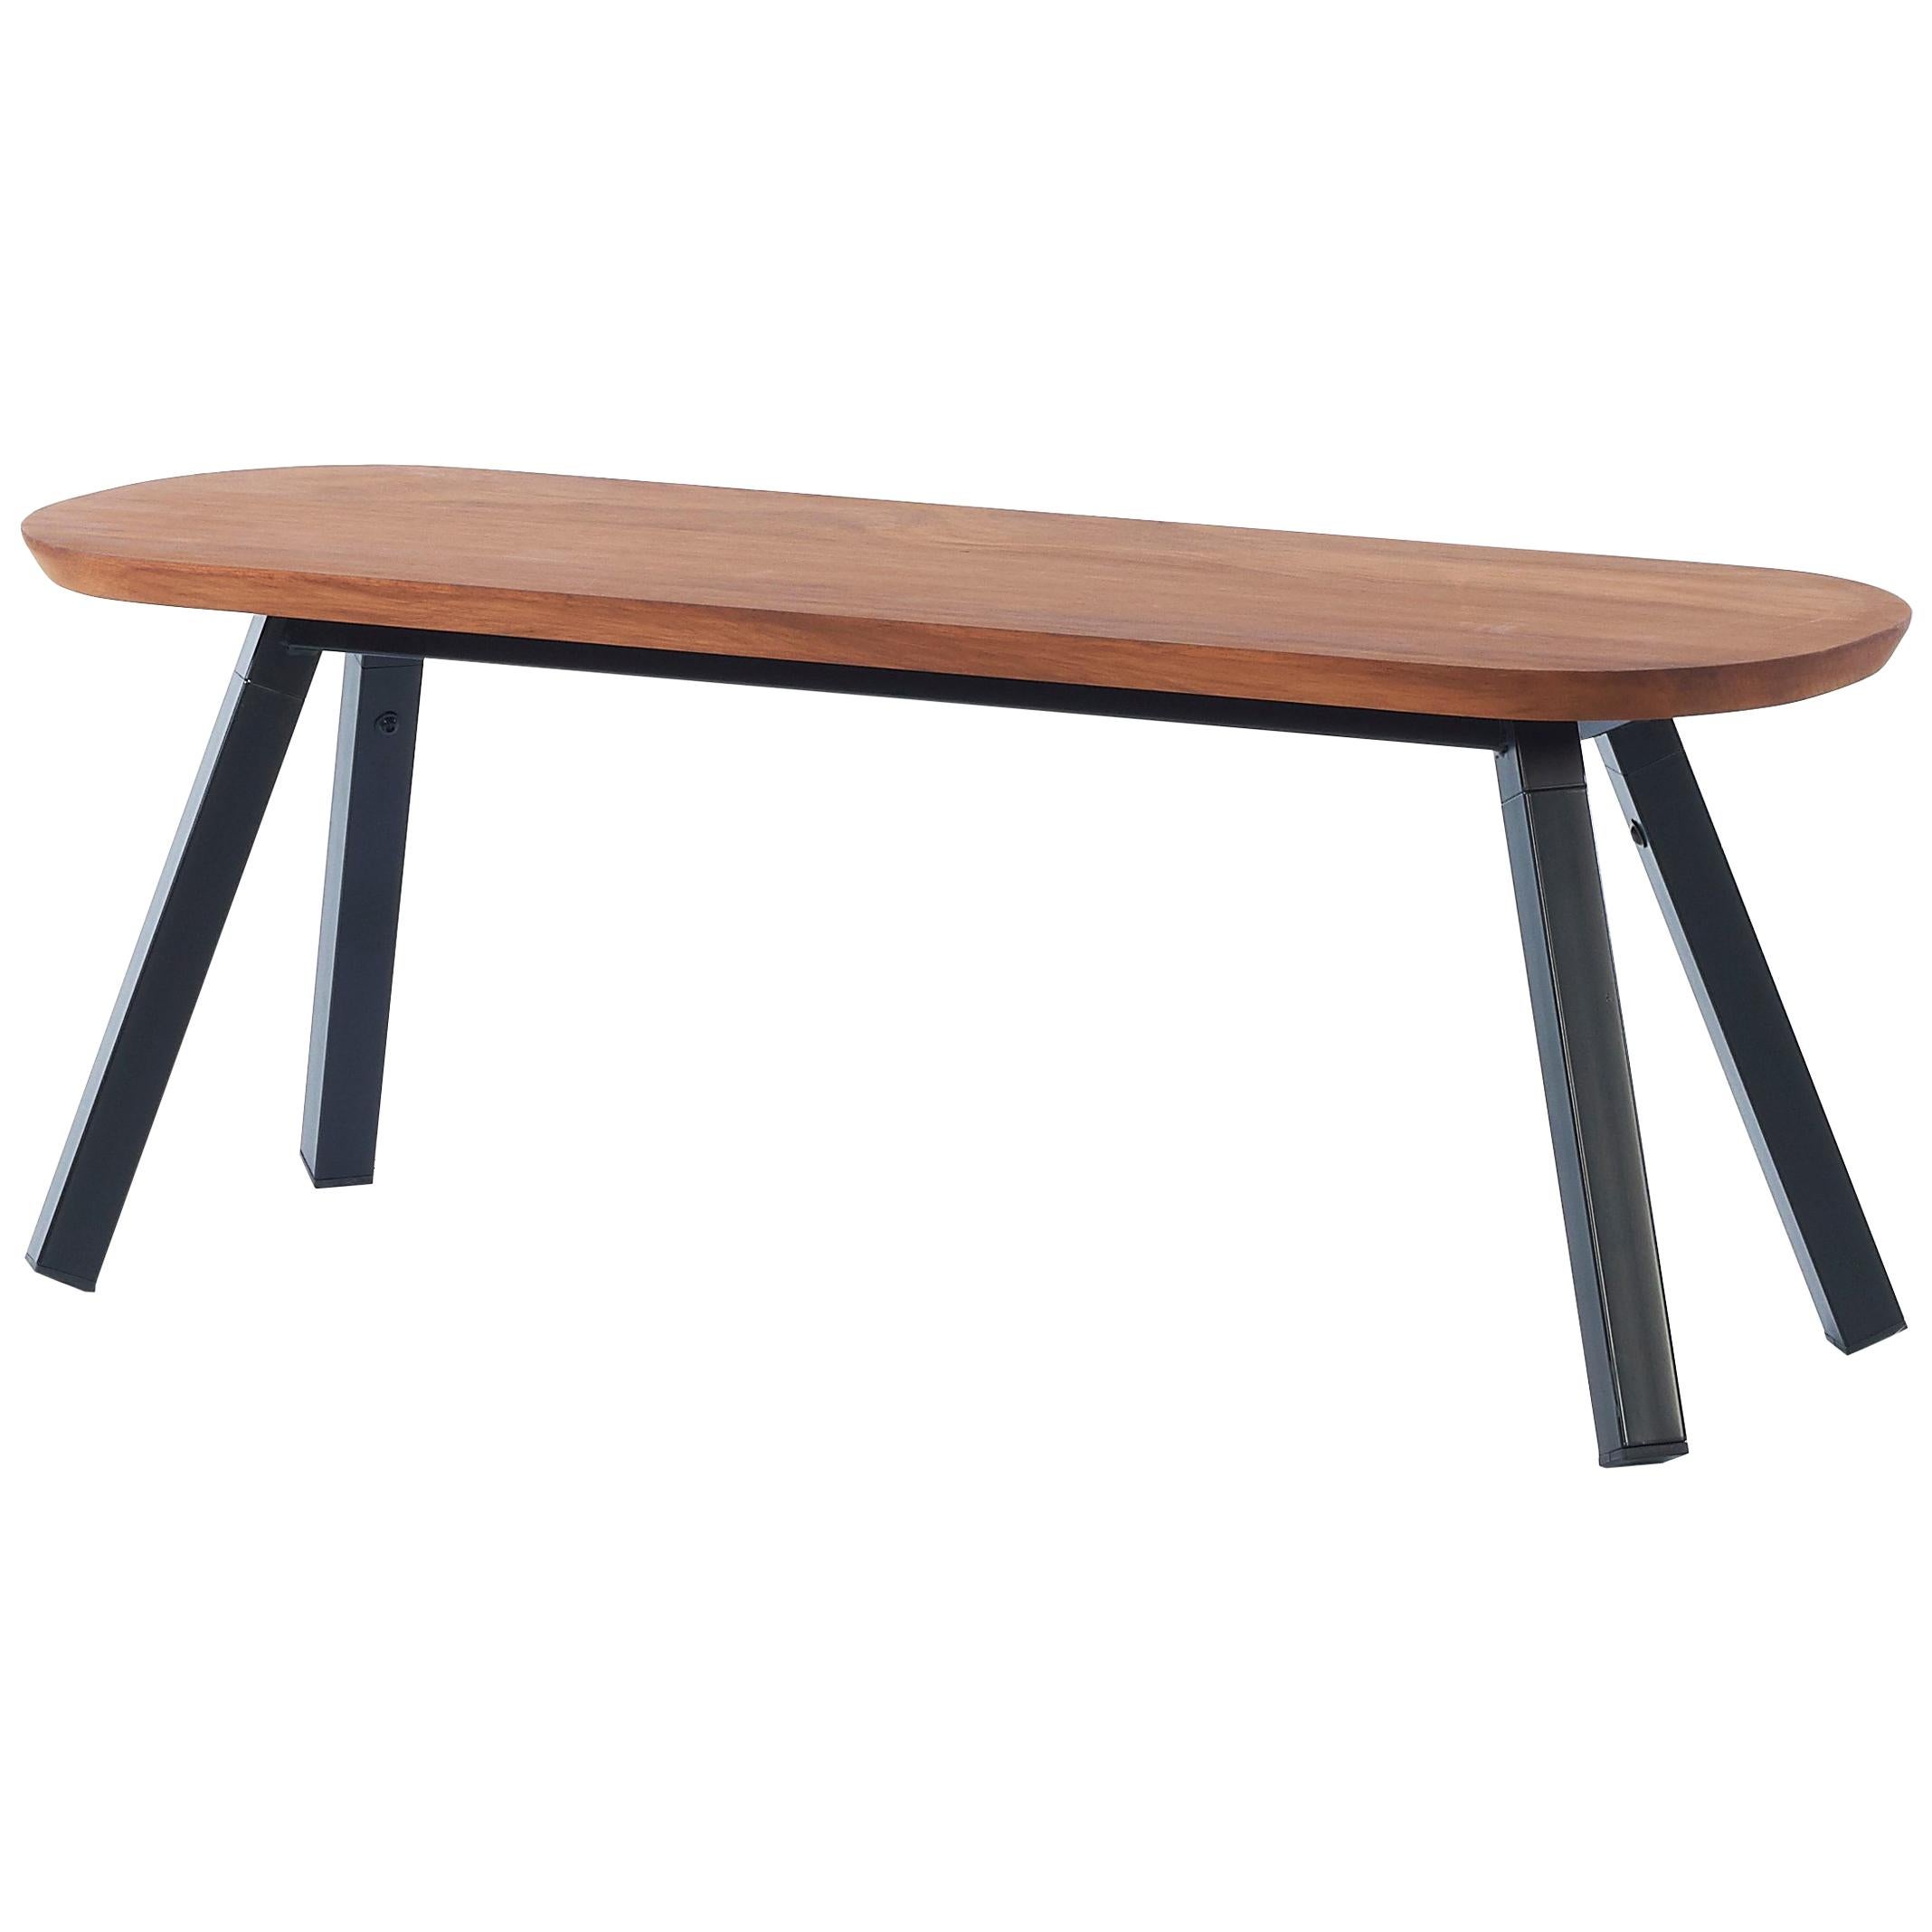 RS Barcelona You & Me 120 Bench in Iroko with Black Legs by A.P.O.